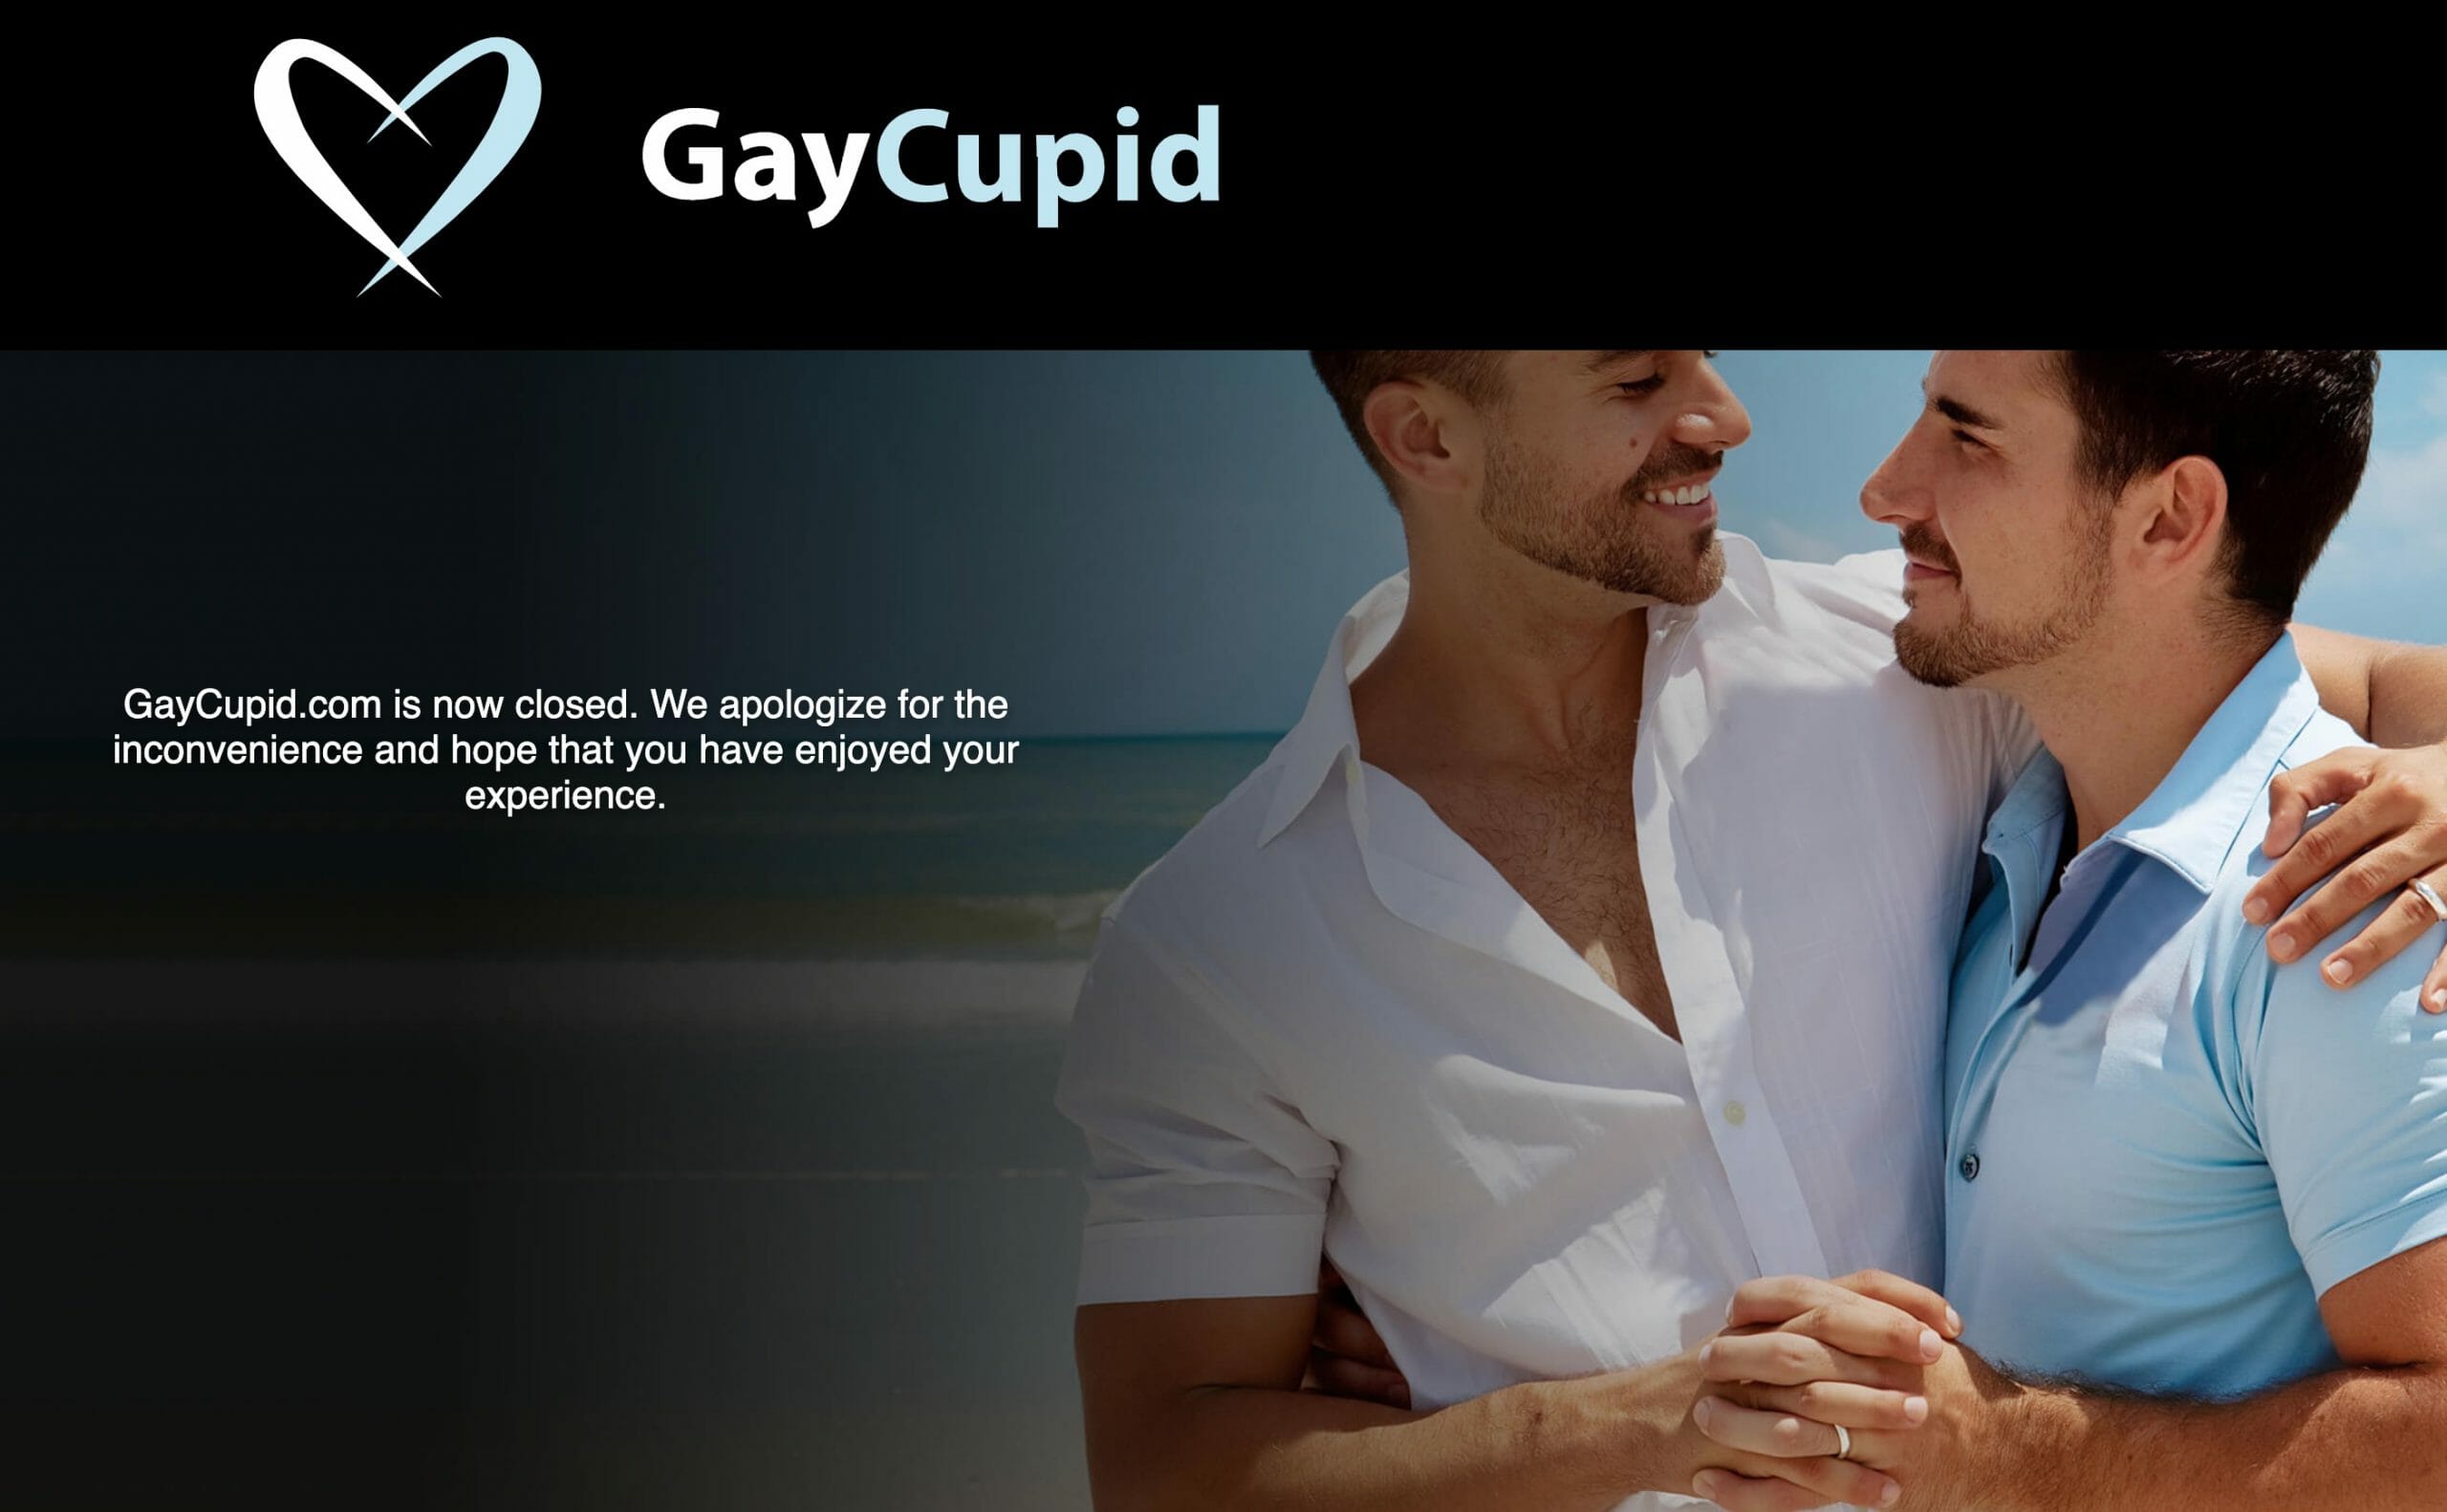 GayСupid main page